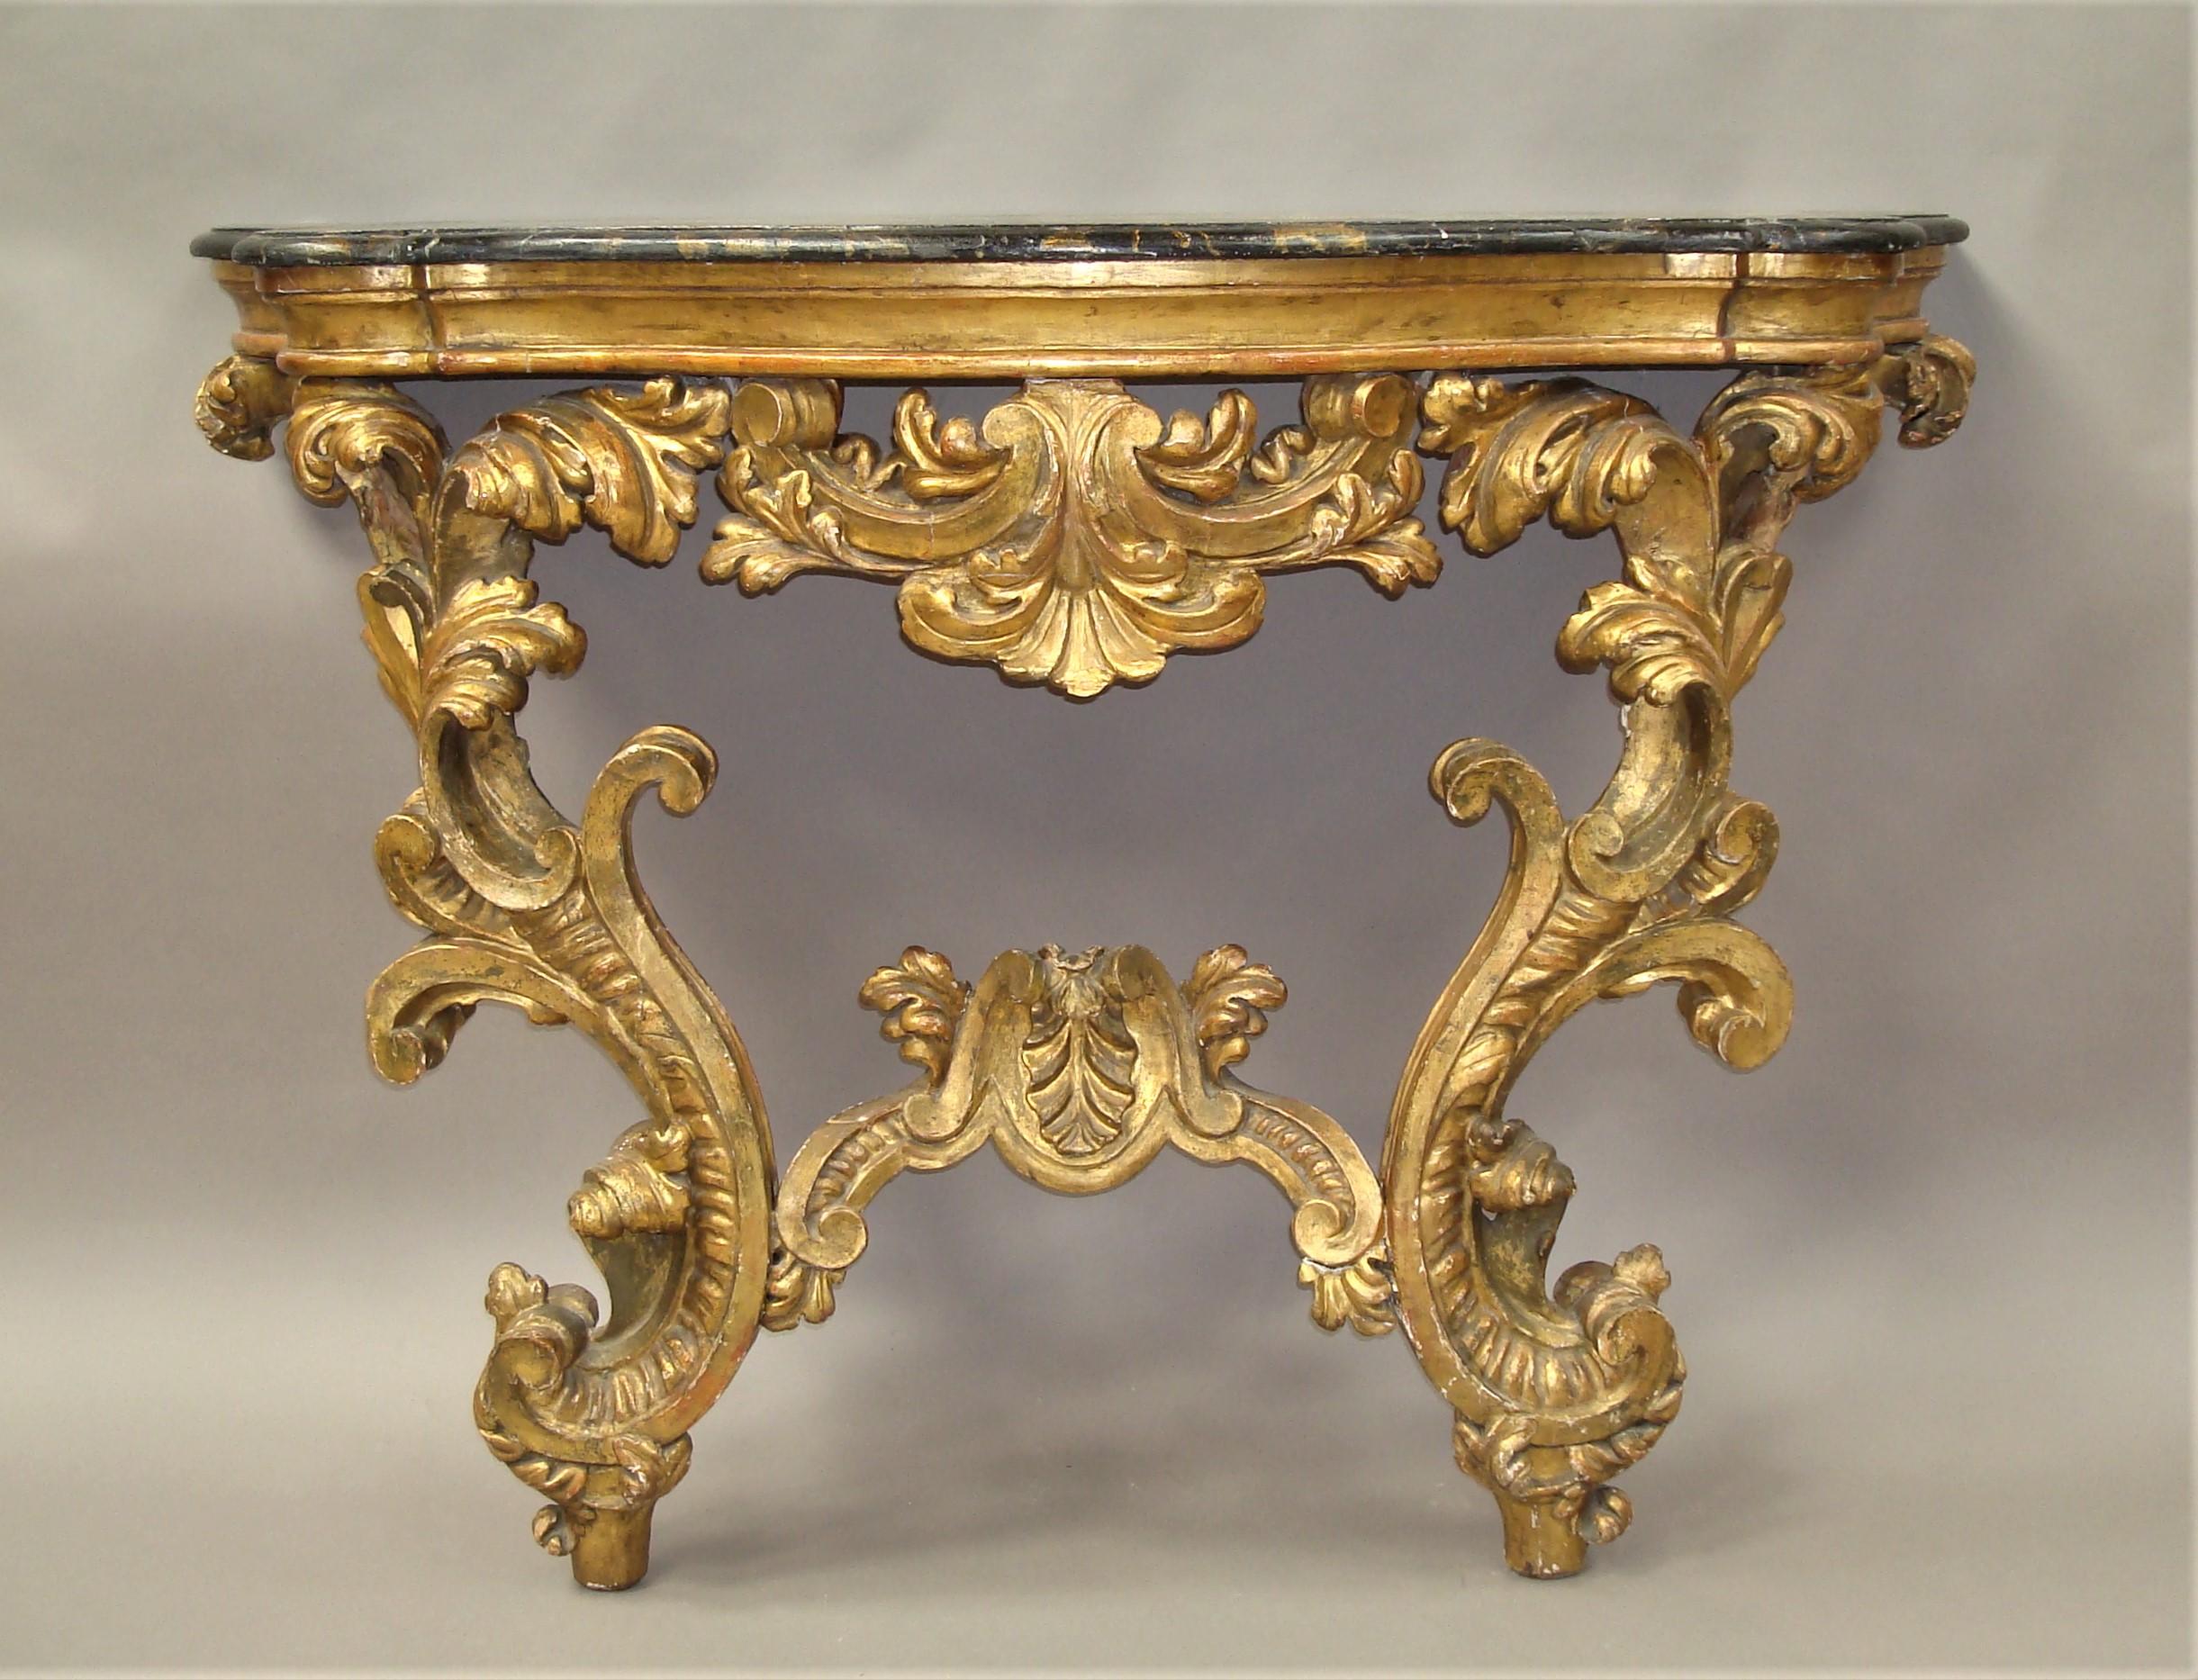 An impressive 18th century Venetian Rococo giltwood console table of serpentine form; the 19th century strikingly painted wooden top, simulating portio marble; with a moulded edge and protruding round corners, above the shallow giltwood shaped